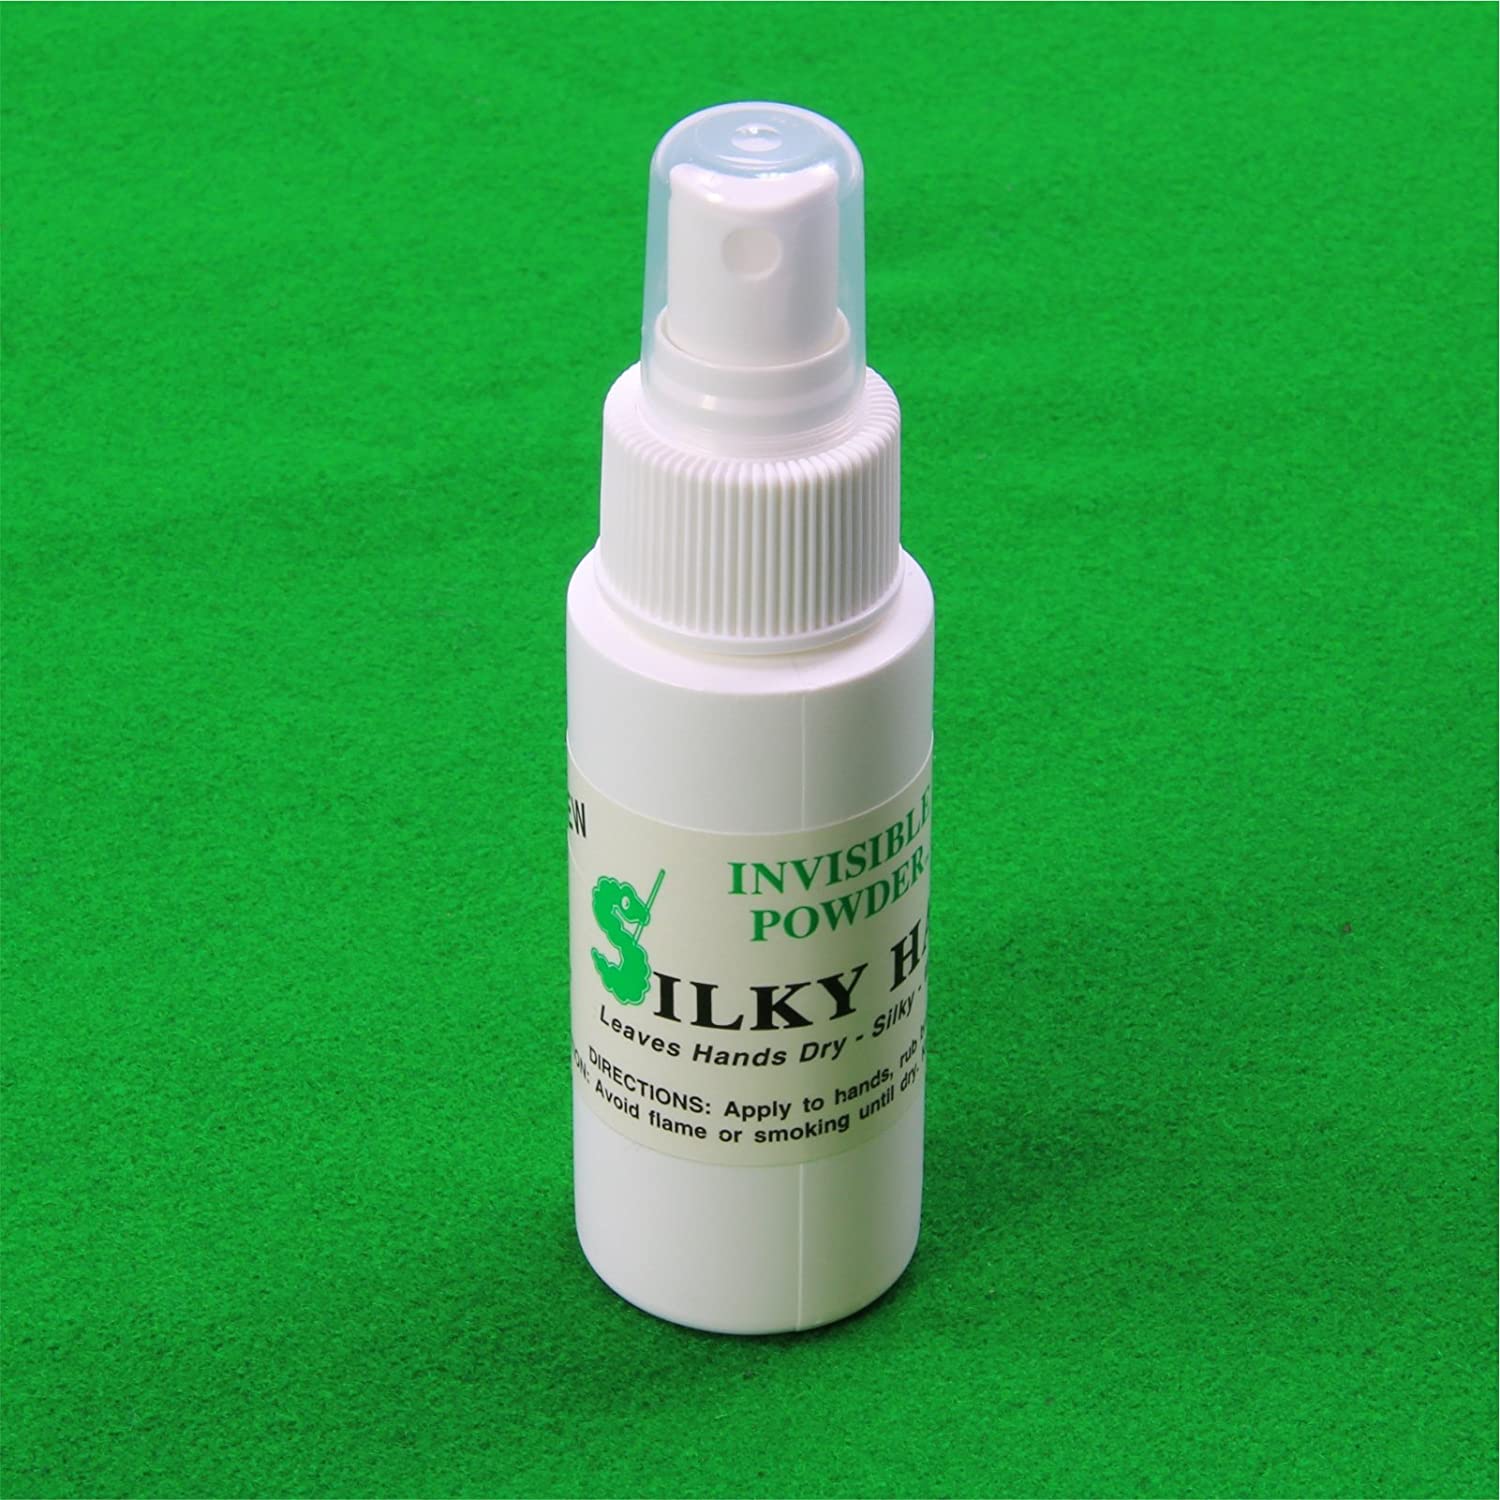 Silky Hands Invisible Powder By Cue Silk Spray Bottle 2oz - On Cue World